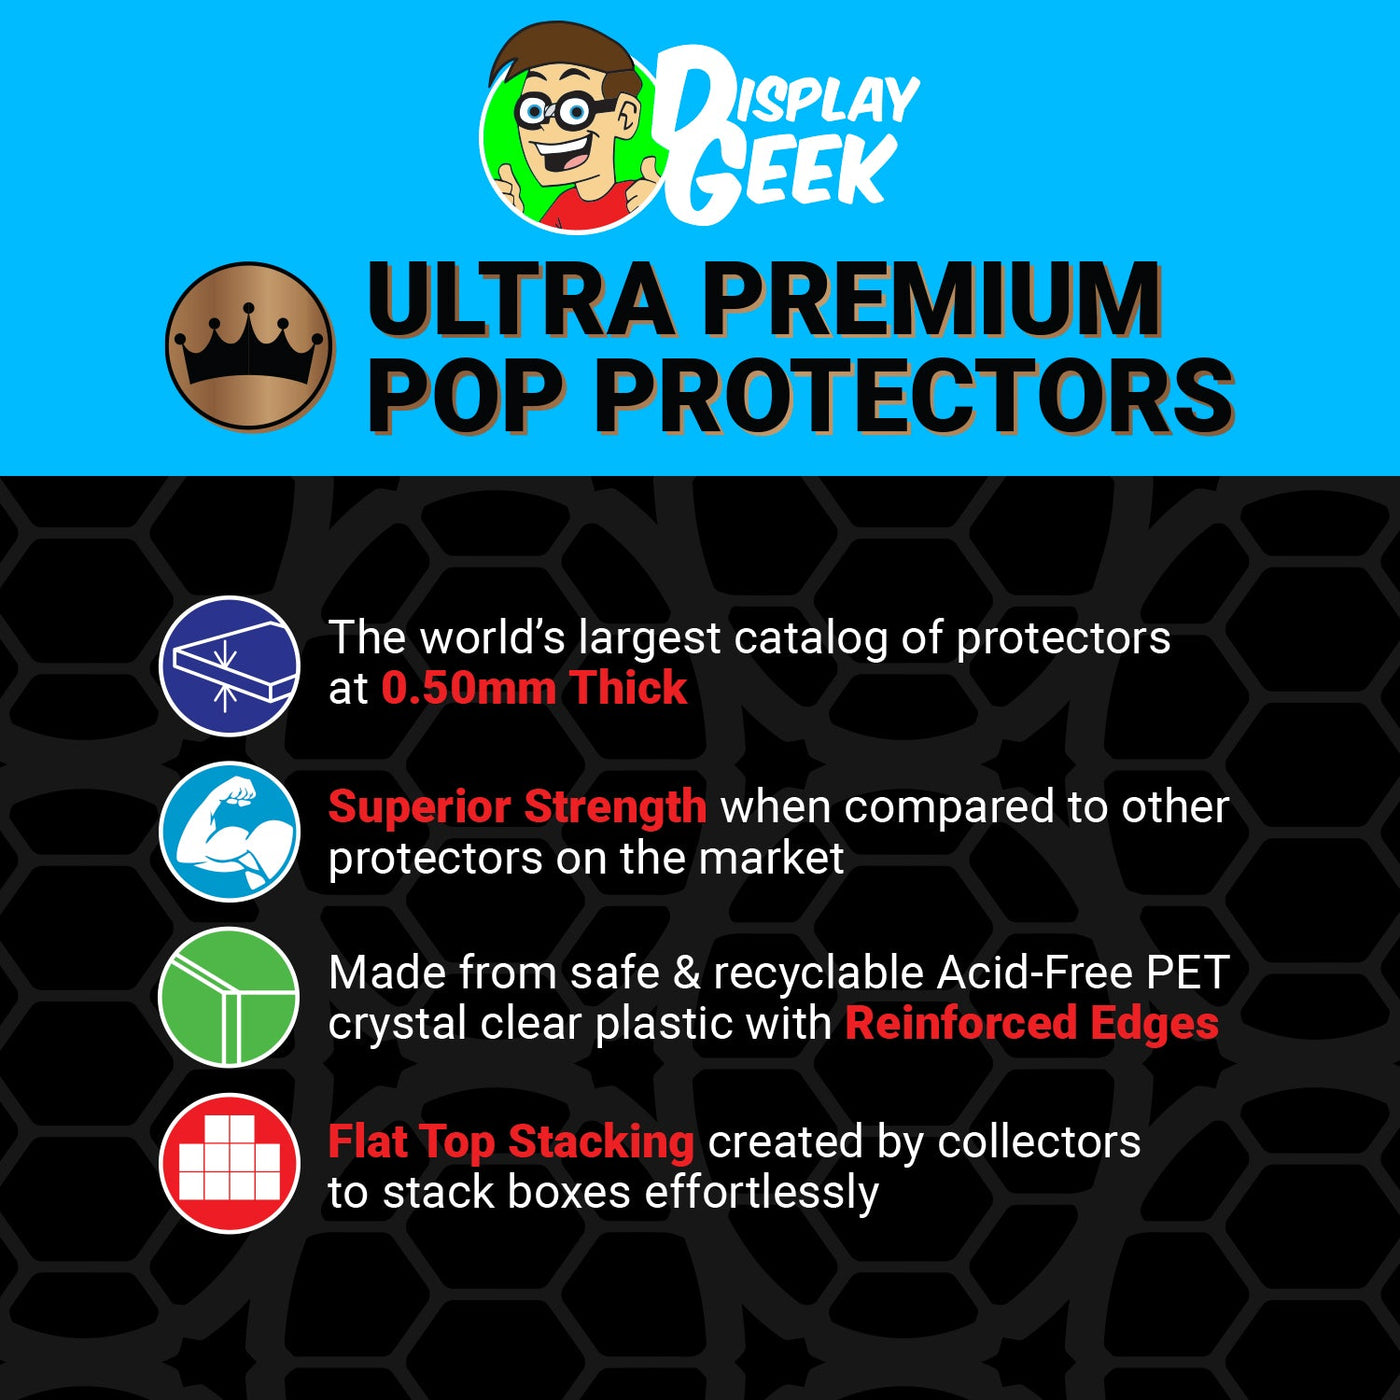 Pop Protector for 10 inch Deadpool Movie Red #544 Jumbo Funko Pop on The Protector Guide App by Display Geek